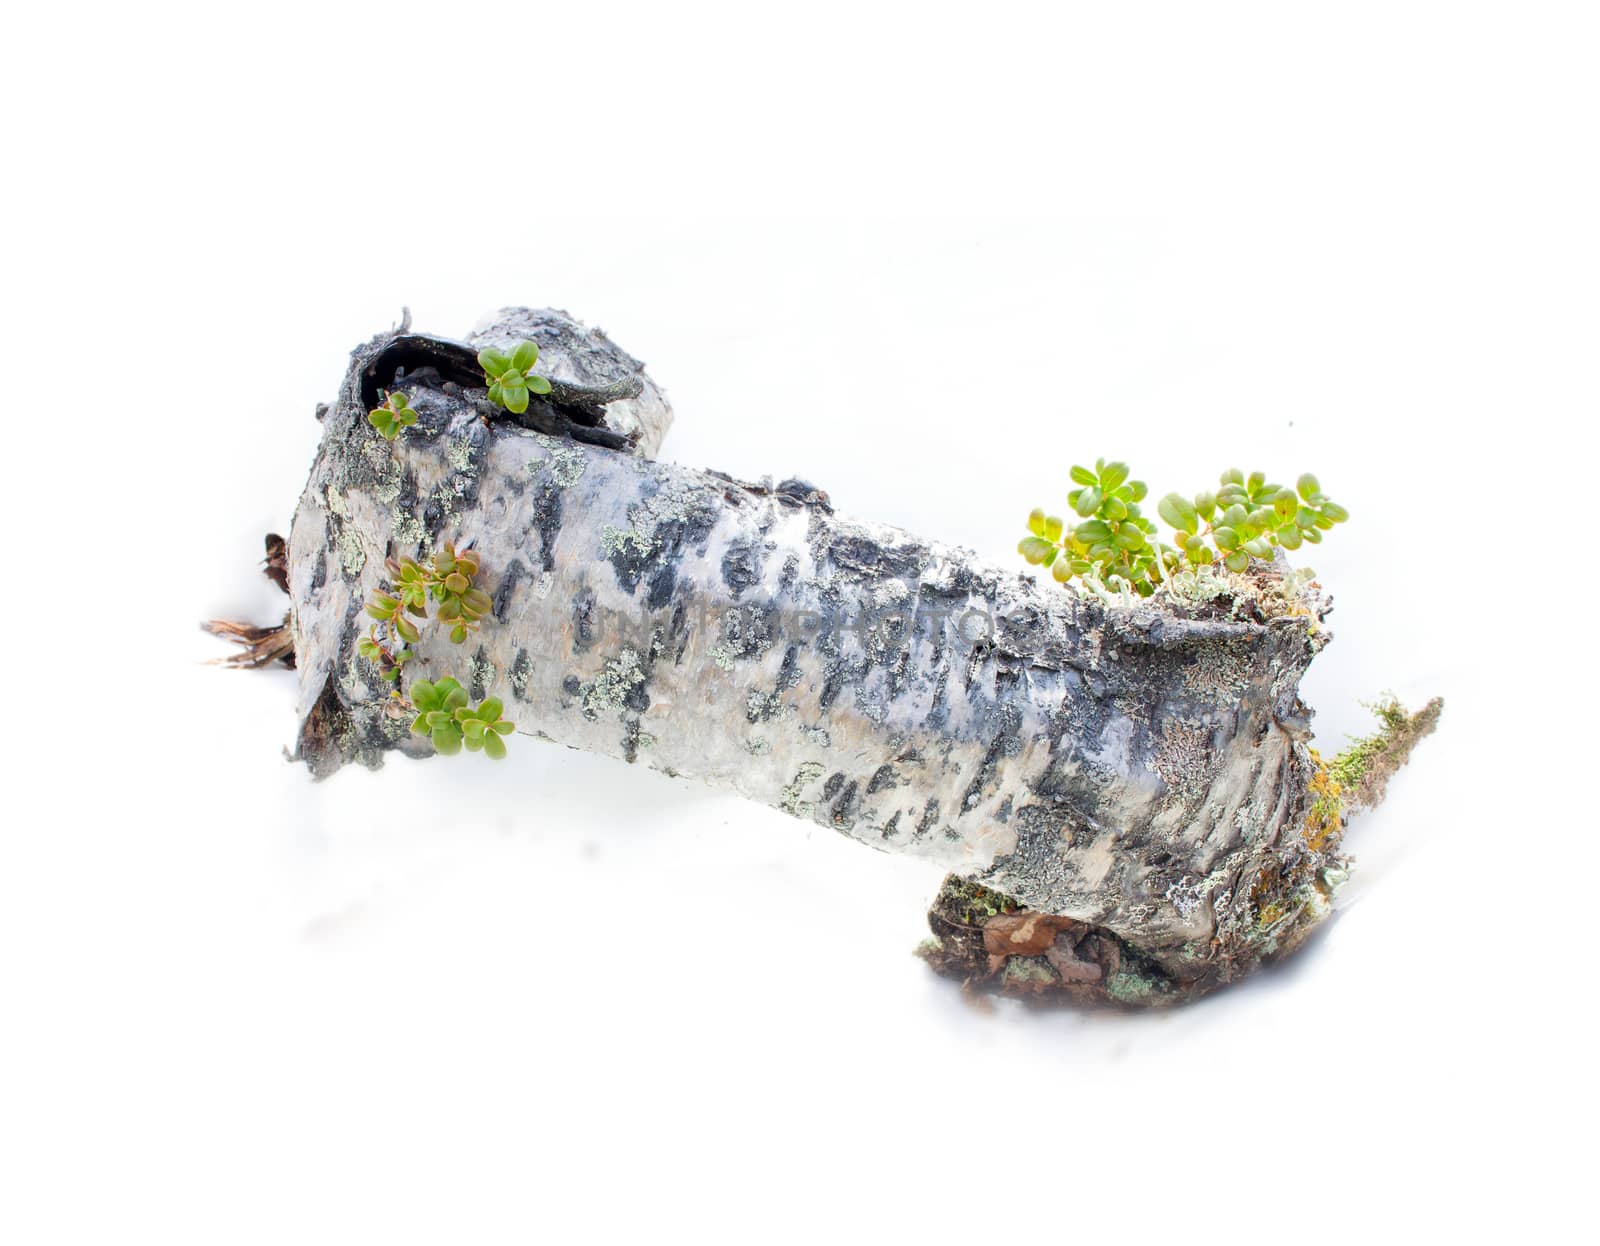 spring stump of a very old and natural on a white background by max51288